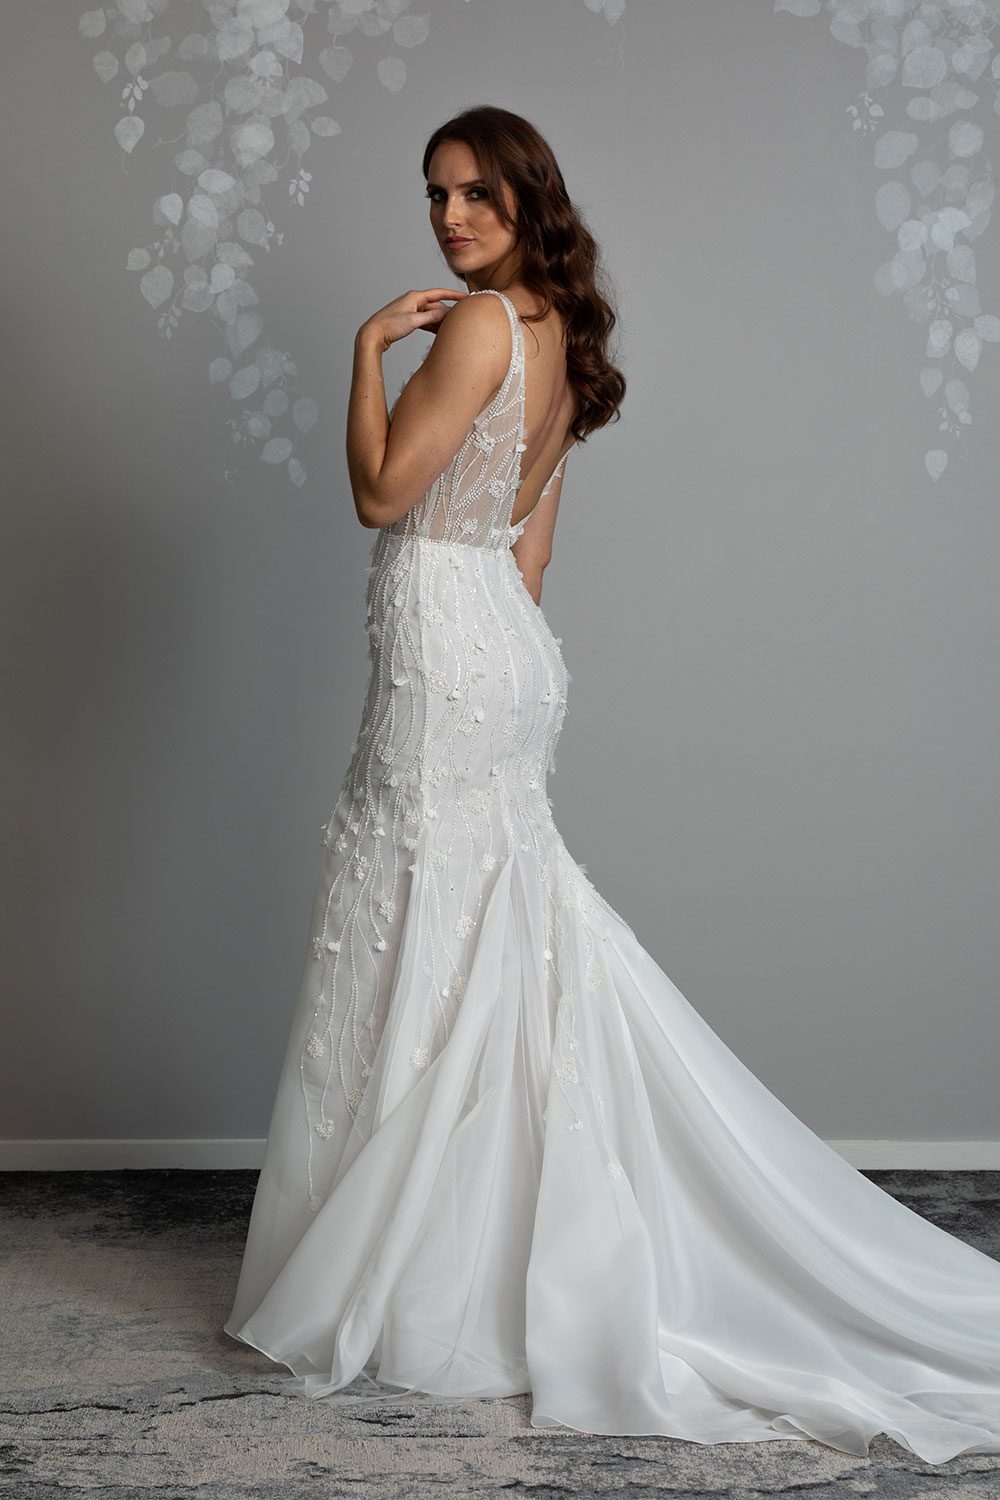 Bronte Wedding Dress by Vinka Design - Featuring a form sculpting mermaid silhouette that embraces the wearer's curves, and intricately embroidered, beaded, botanical lace that trails seamlessly from the bodice into the skirt. Crafted on a semi-sheer base, the bodice boasts a V-neckline and beautiful low V-back. Artfully constructed with layers of dreamy, yet dramatic silk organza and soft tulle, added flare and fullness is achieved through the skirt which fans into a sweeping opulent train. Profile view of model with hand to shoulder wearing low V back bodice with intricately embroidered beaded botanical lace and full skirt with sweeping train